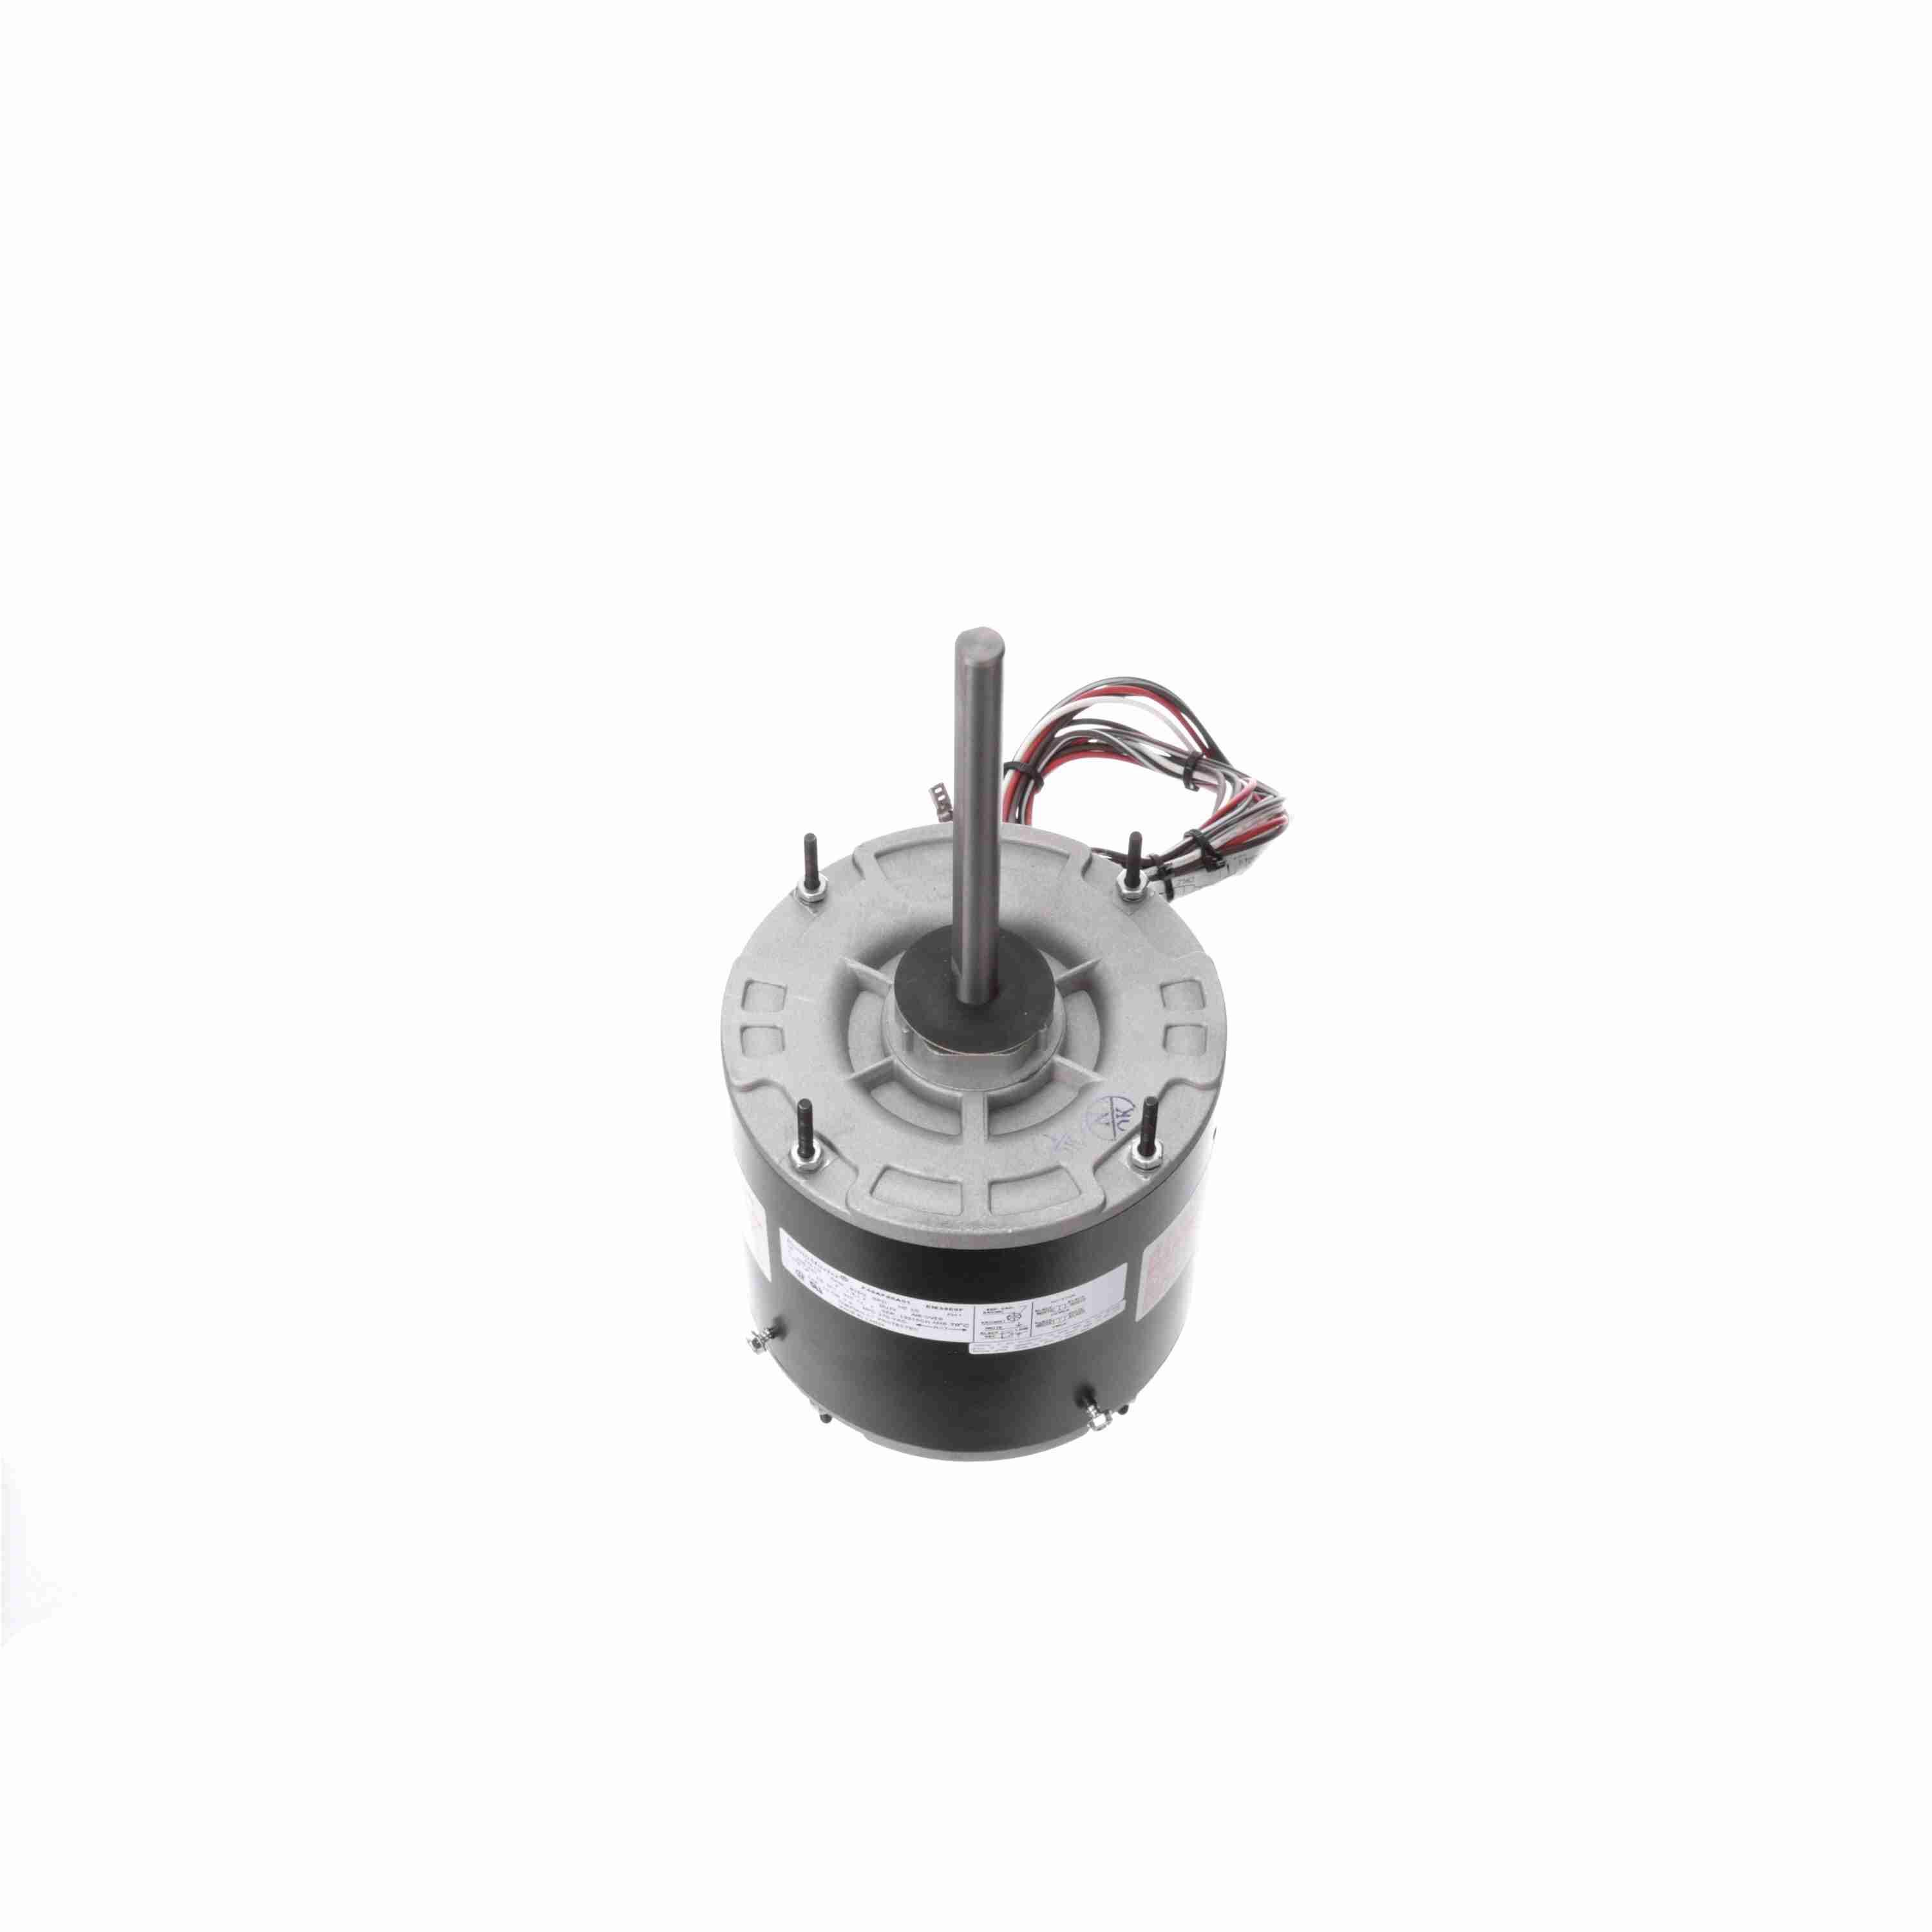 Century® EM3469F 8-Pole HVAC/R Motor, Totally Enclosed Air Over Enclosure, 1/3, 1/5 hp, 208 to 230 V, 60 Hz, 1 Phase, 48Y Frame, 825 rpm Speed, Extended Stud Mount